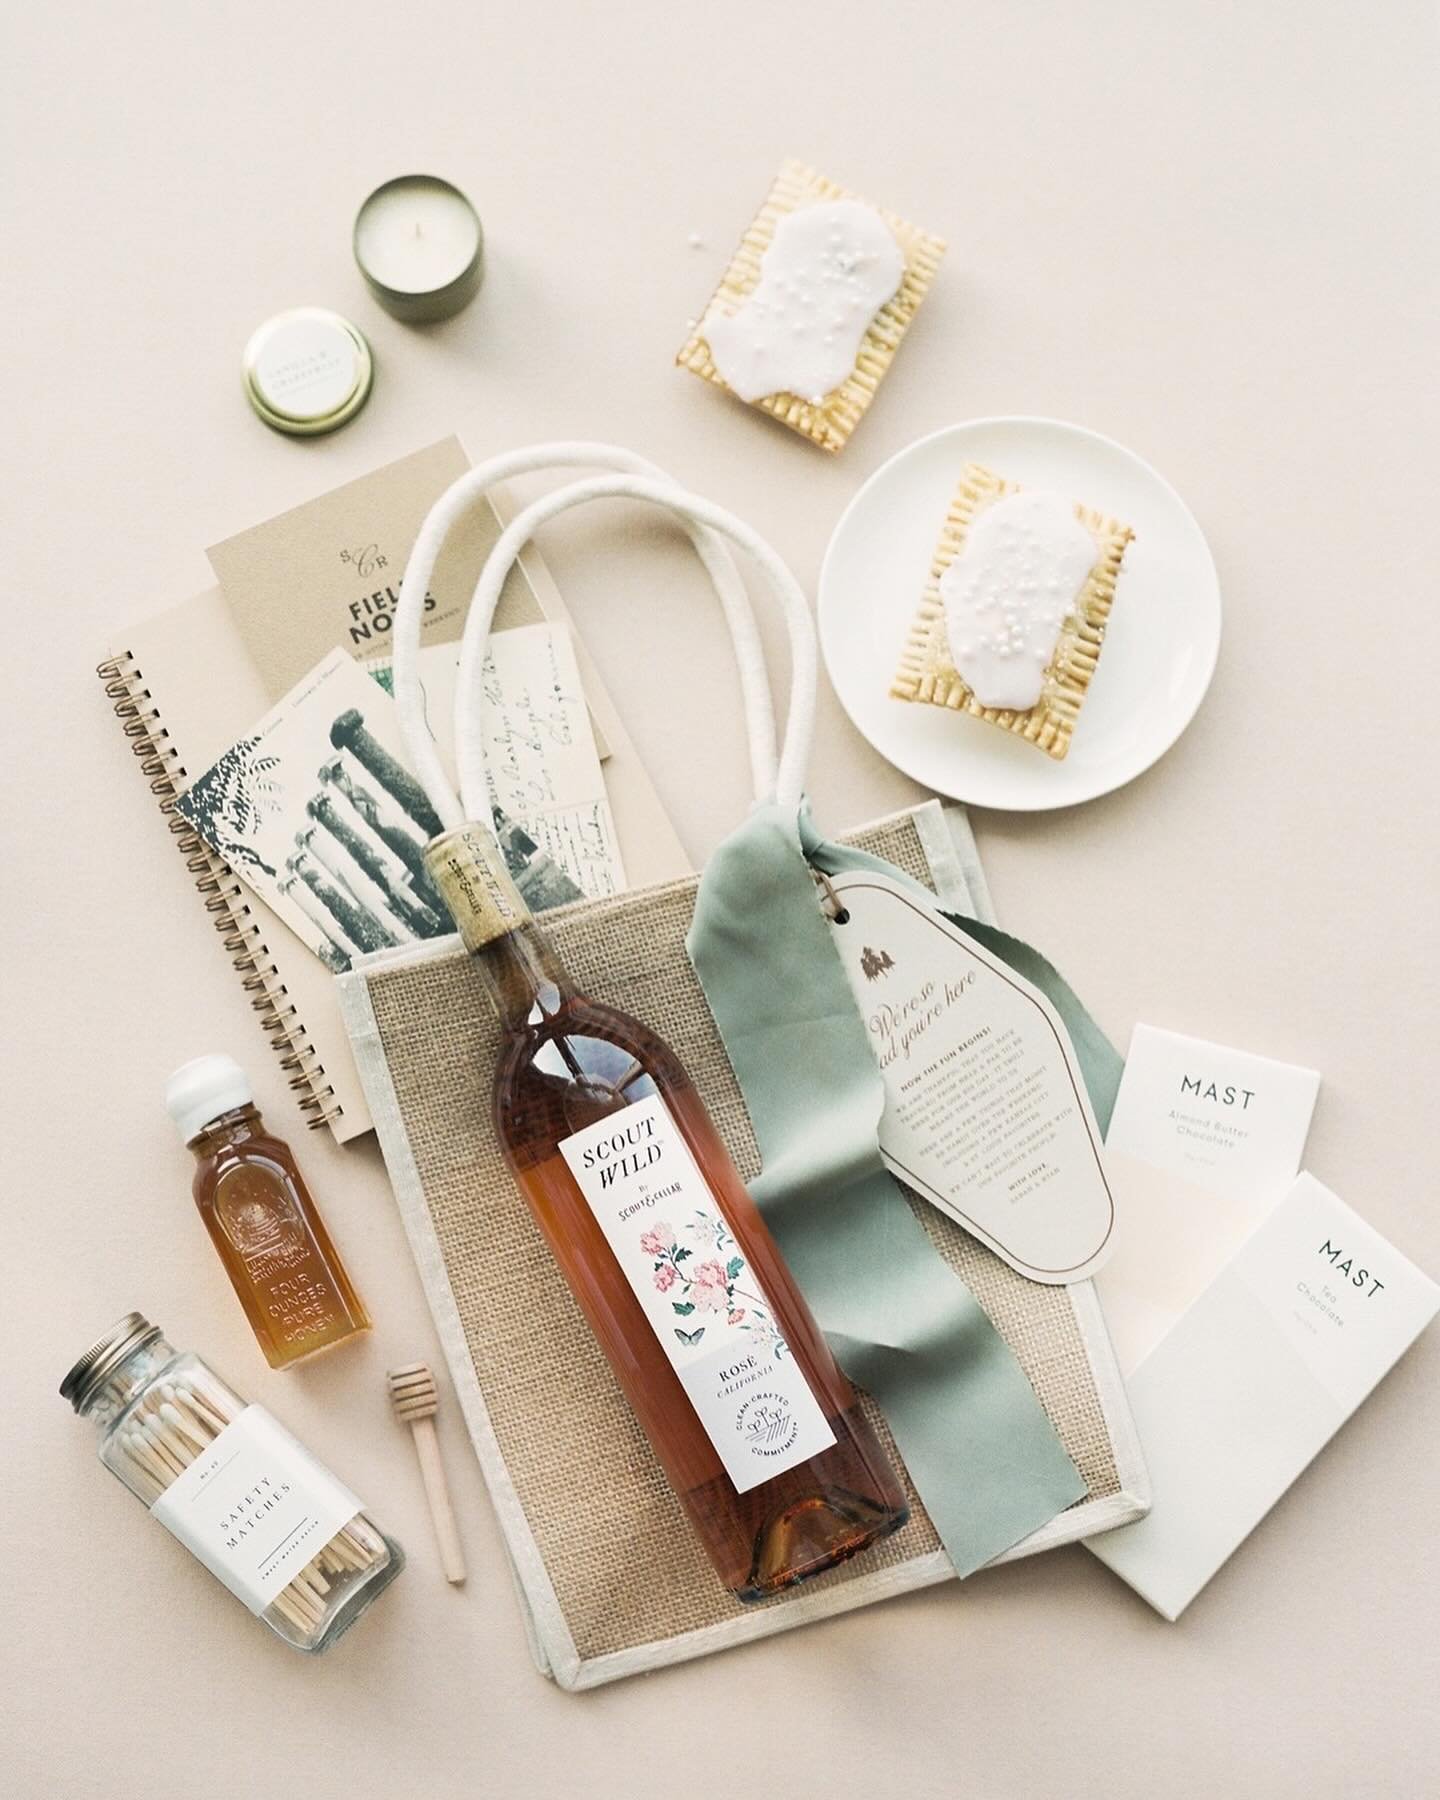 Are welcome bags just a passing trend or a heartfelt gesture?⤵️
⠀⠀⠀⠀⠀⠀⠀⠀⠀
Guest experience has taken the spotlight in nearly every wedding survey this year. Ensuring that all your loved ones have a memorable and enjoyable time at your event is a prio